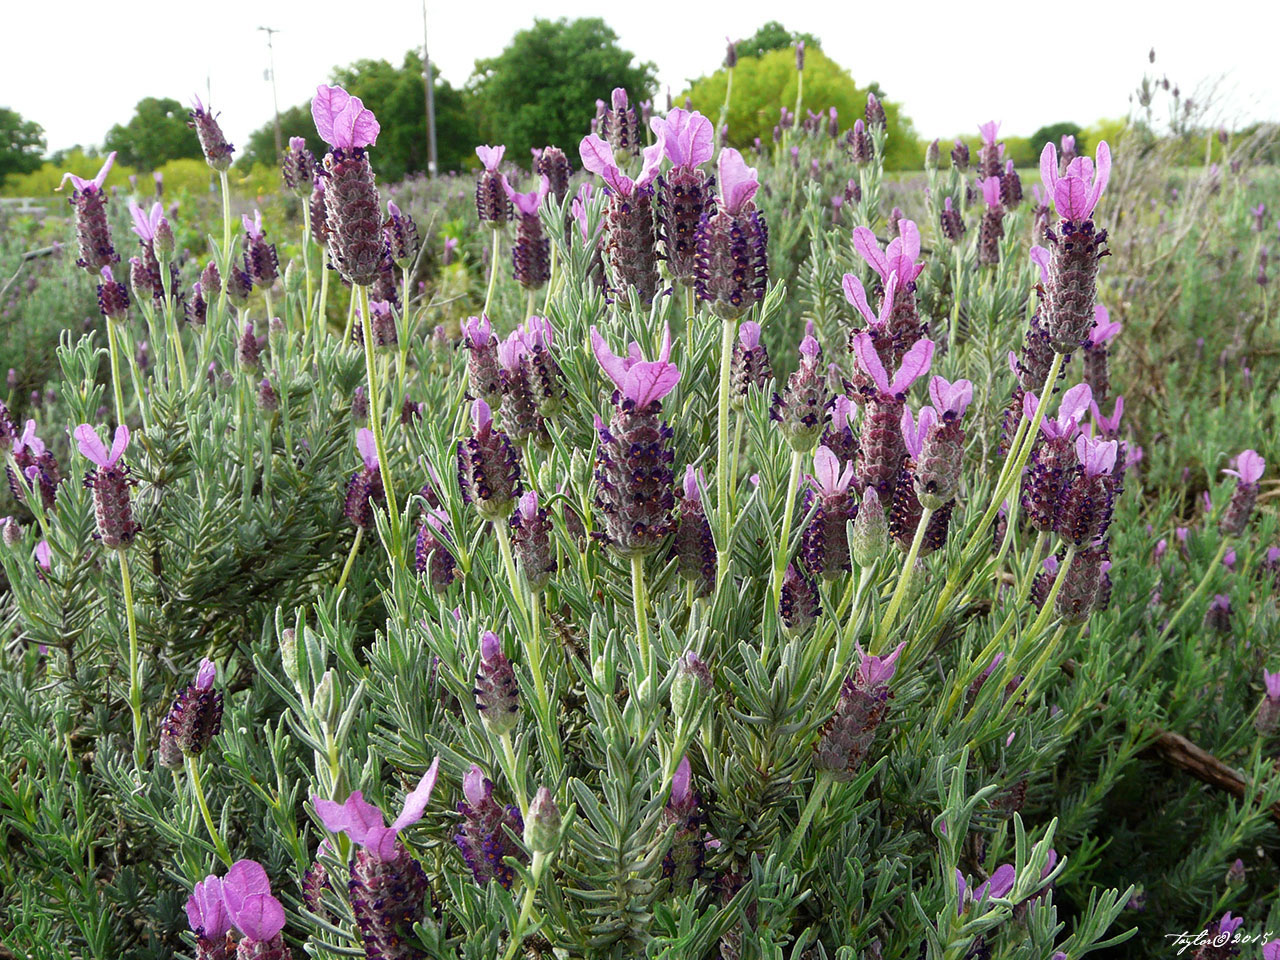 A Field of Lavender - purple spires waving in the wind.